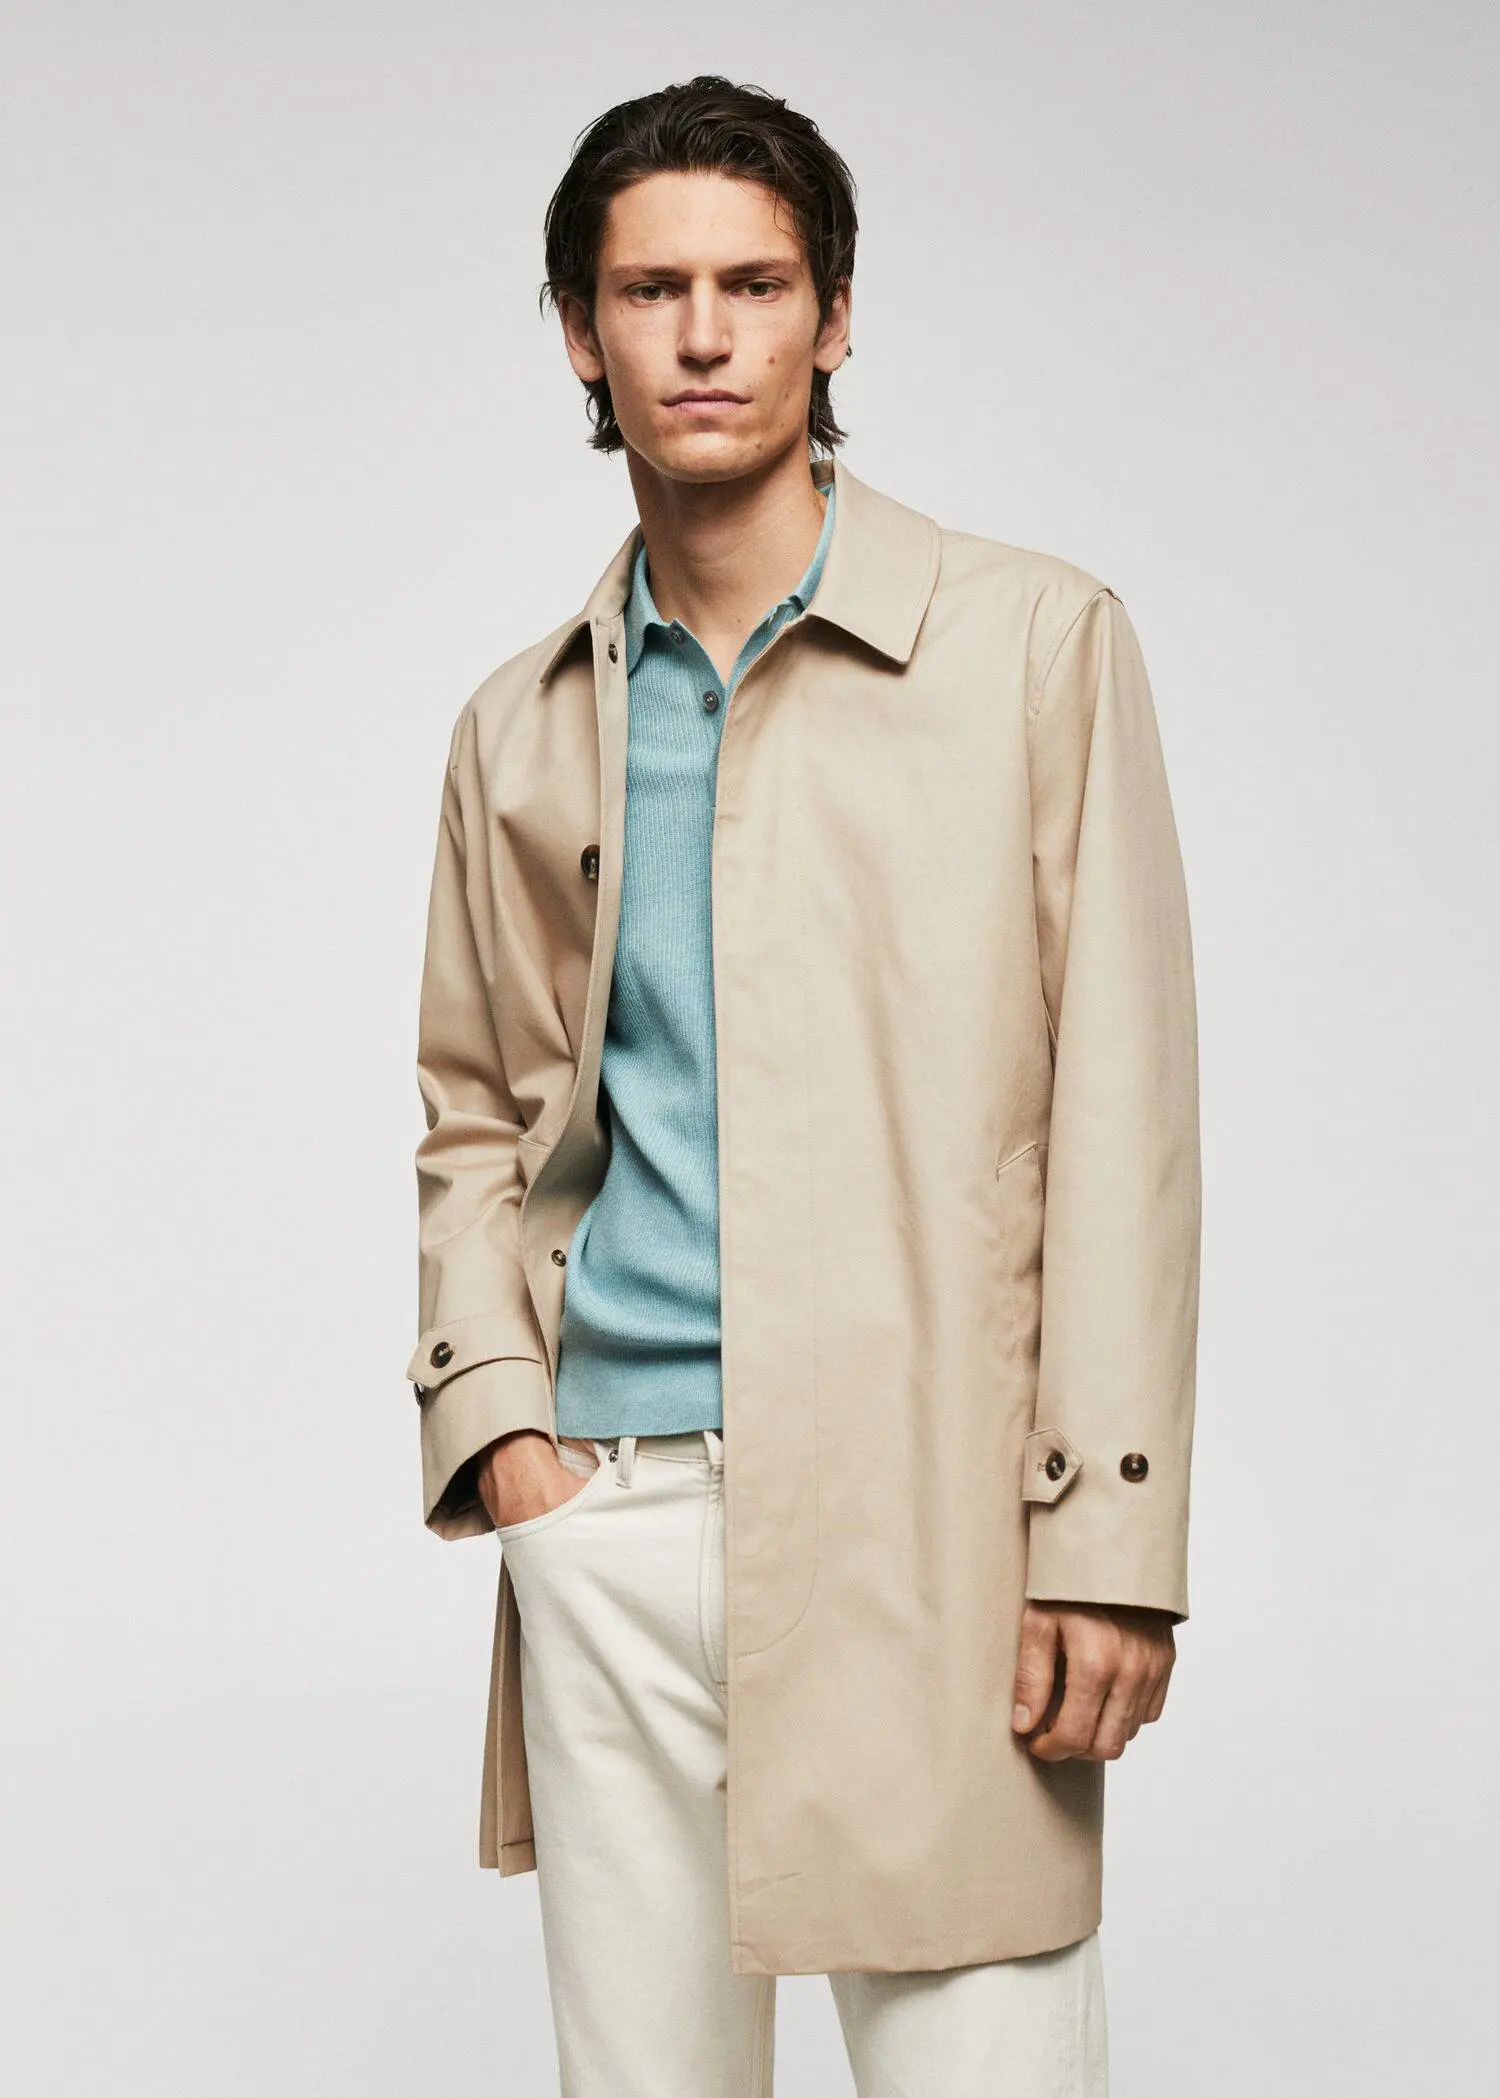 Mango Water-repellent cotton trench coat. a man wearing a tan coat and white pants. 